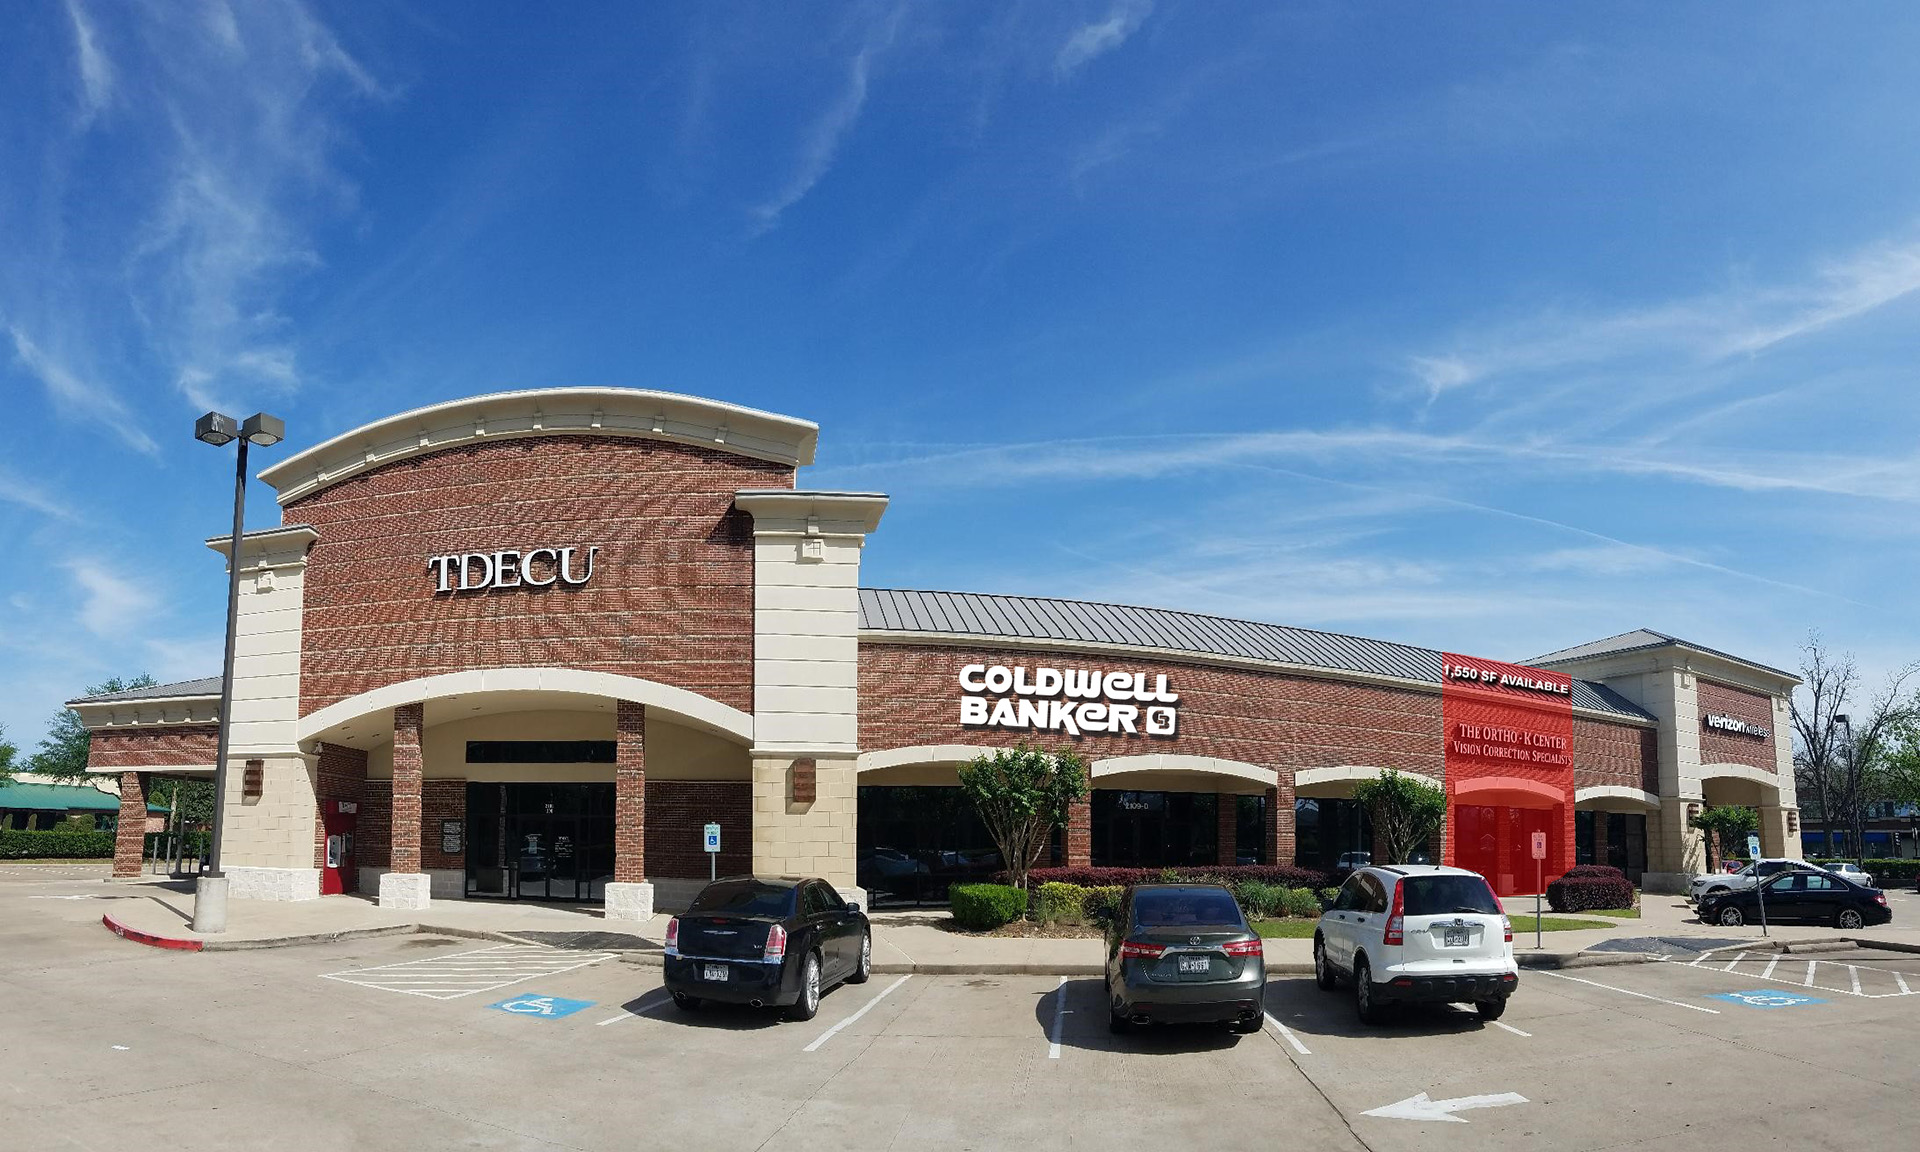 Creekside At Town Center Sugar Land,Texas <br>
<h2><span style=